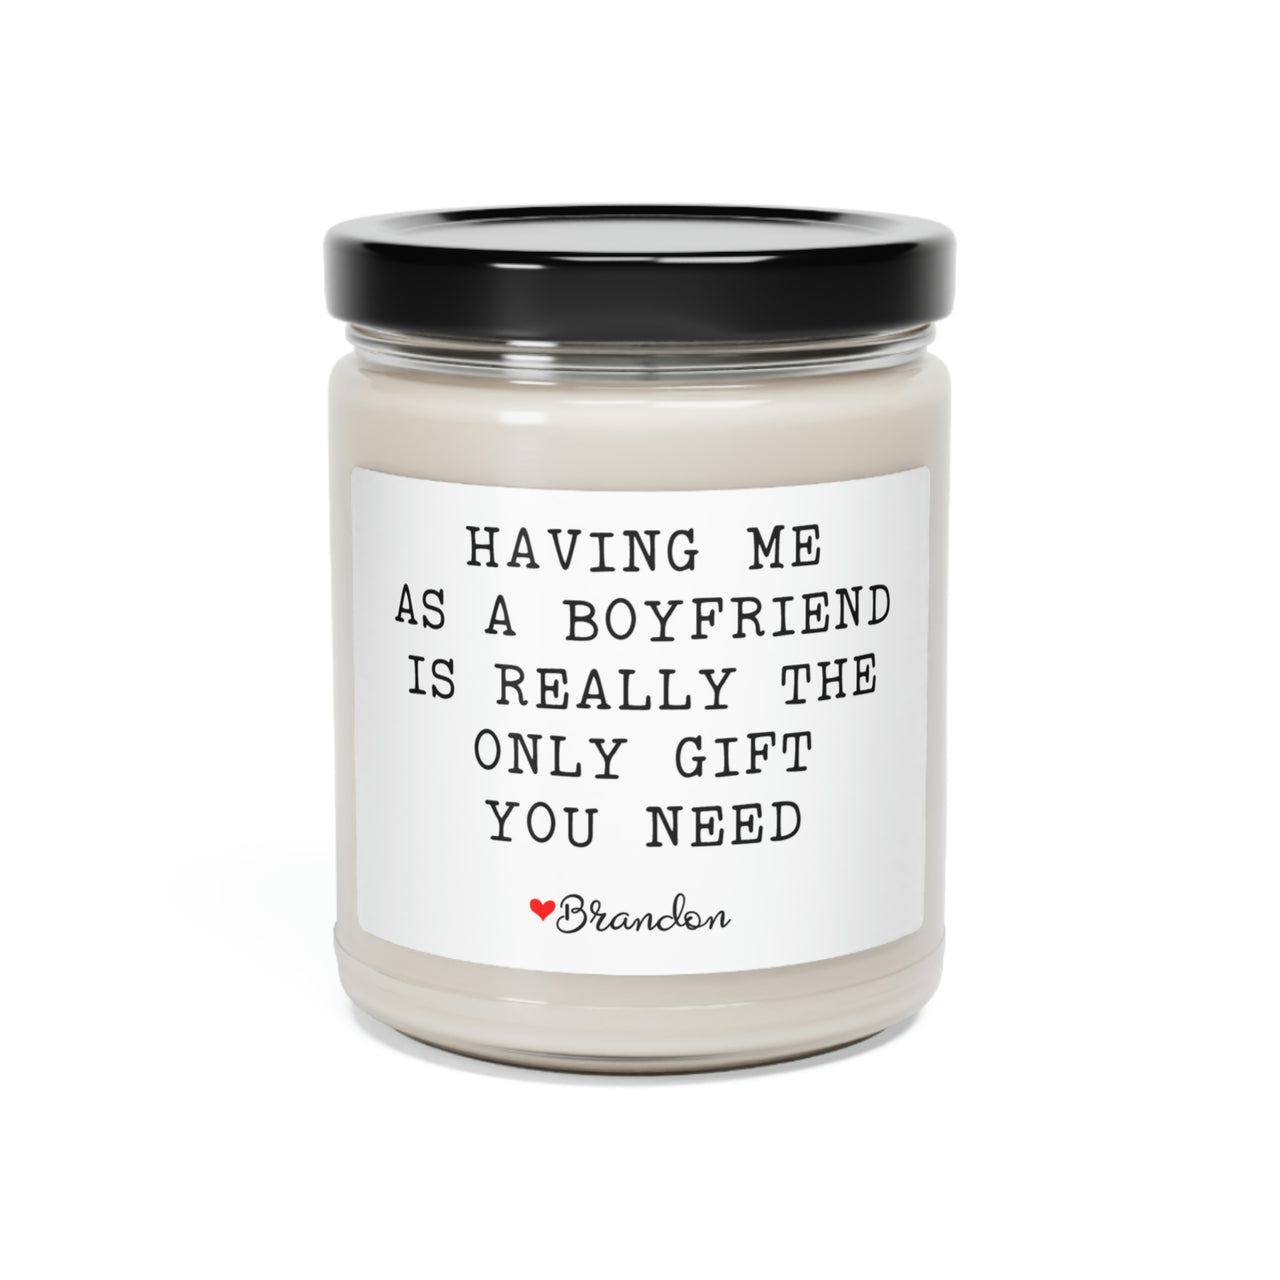 Having Me as a Boyfriend is Really the Only Gift You Need - Scented Soy Candle Gift for Girlfriend